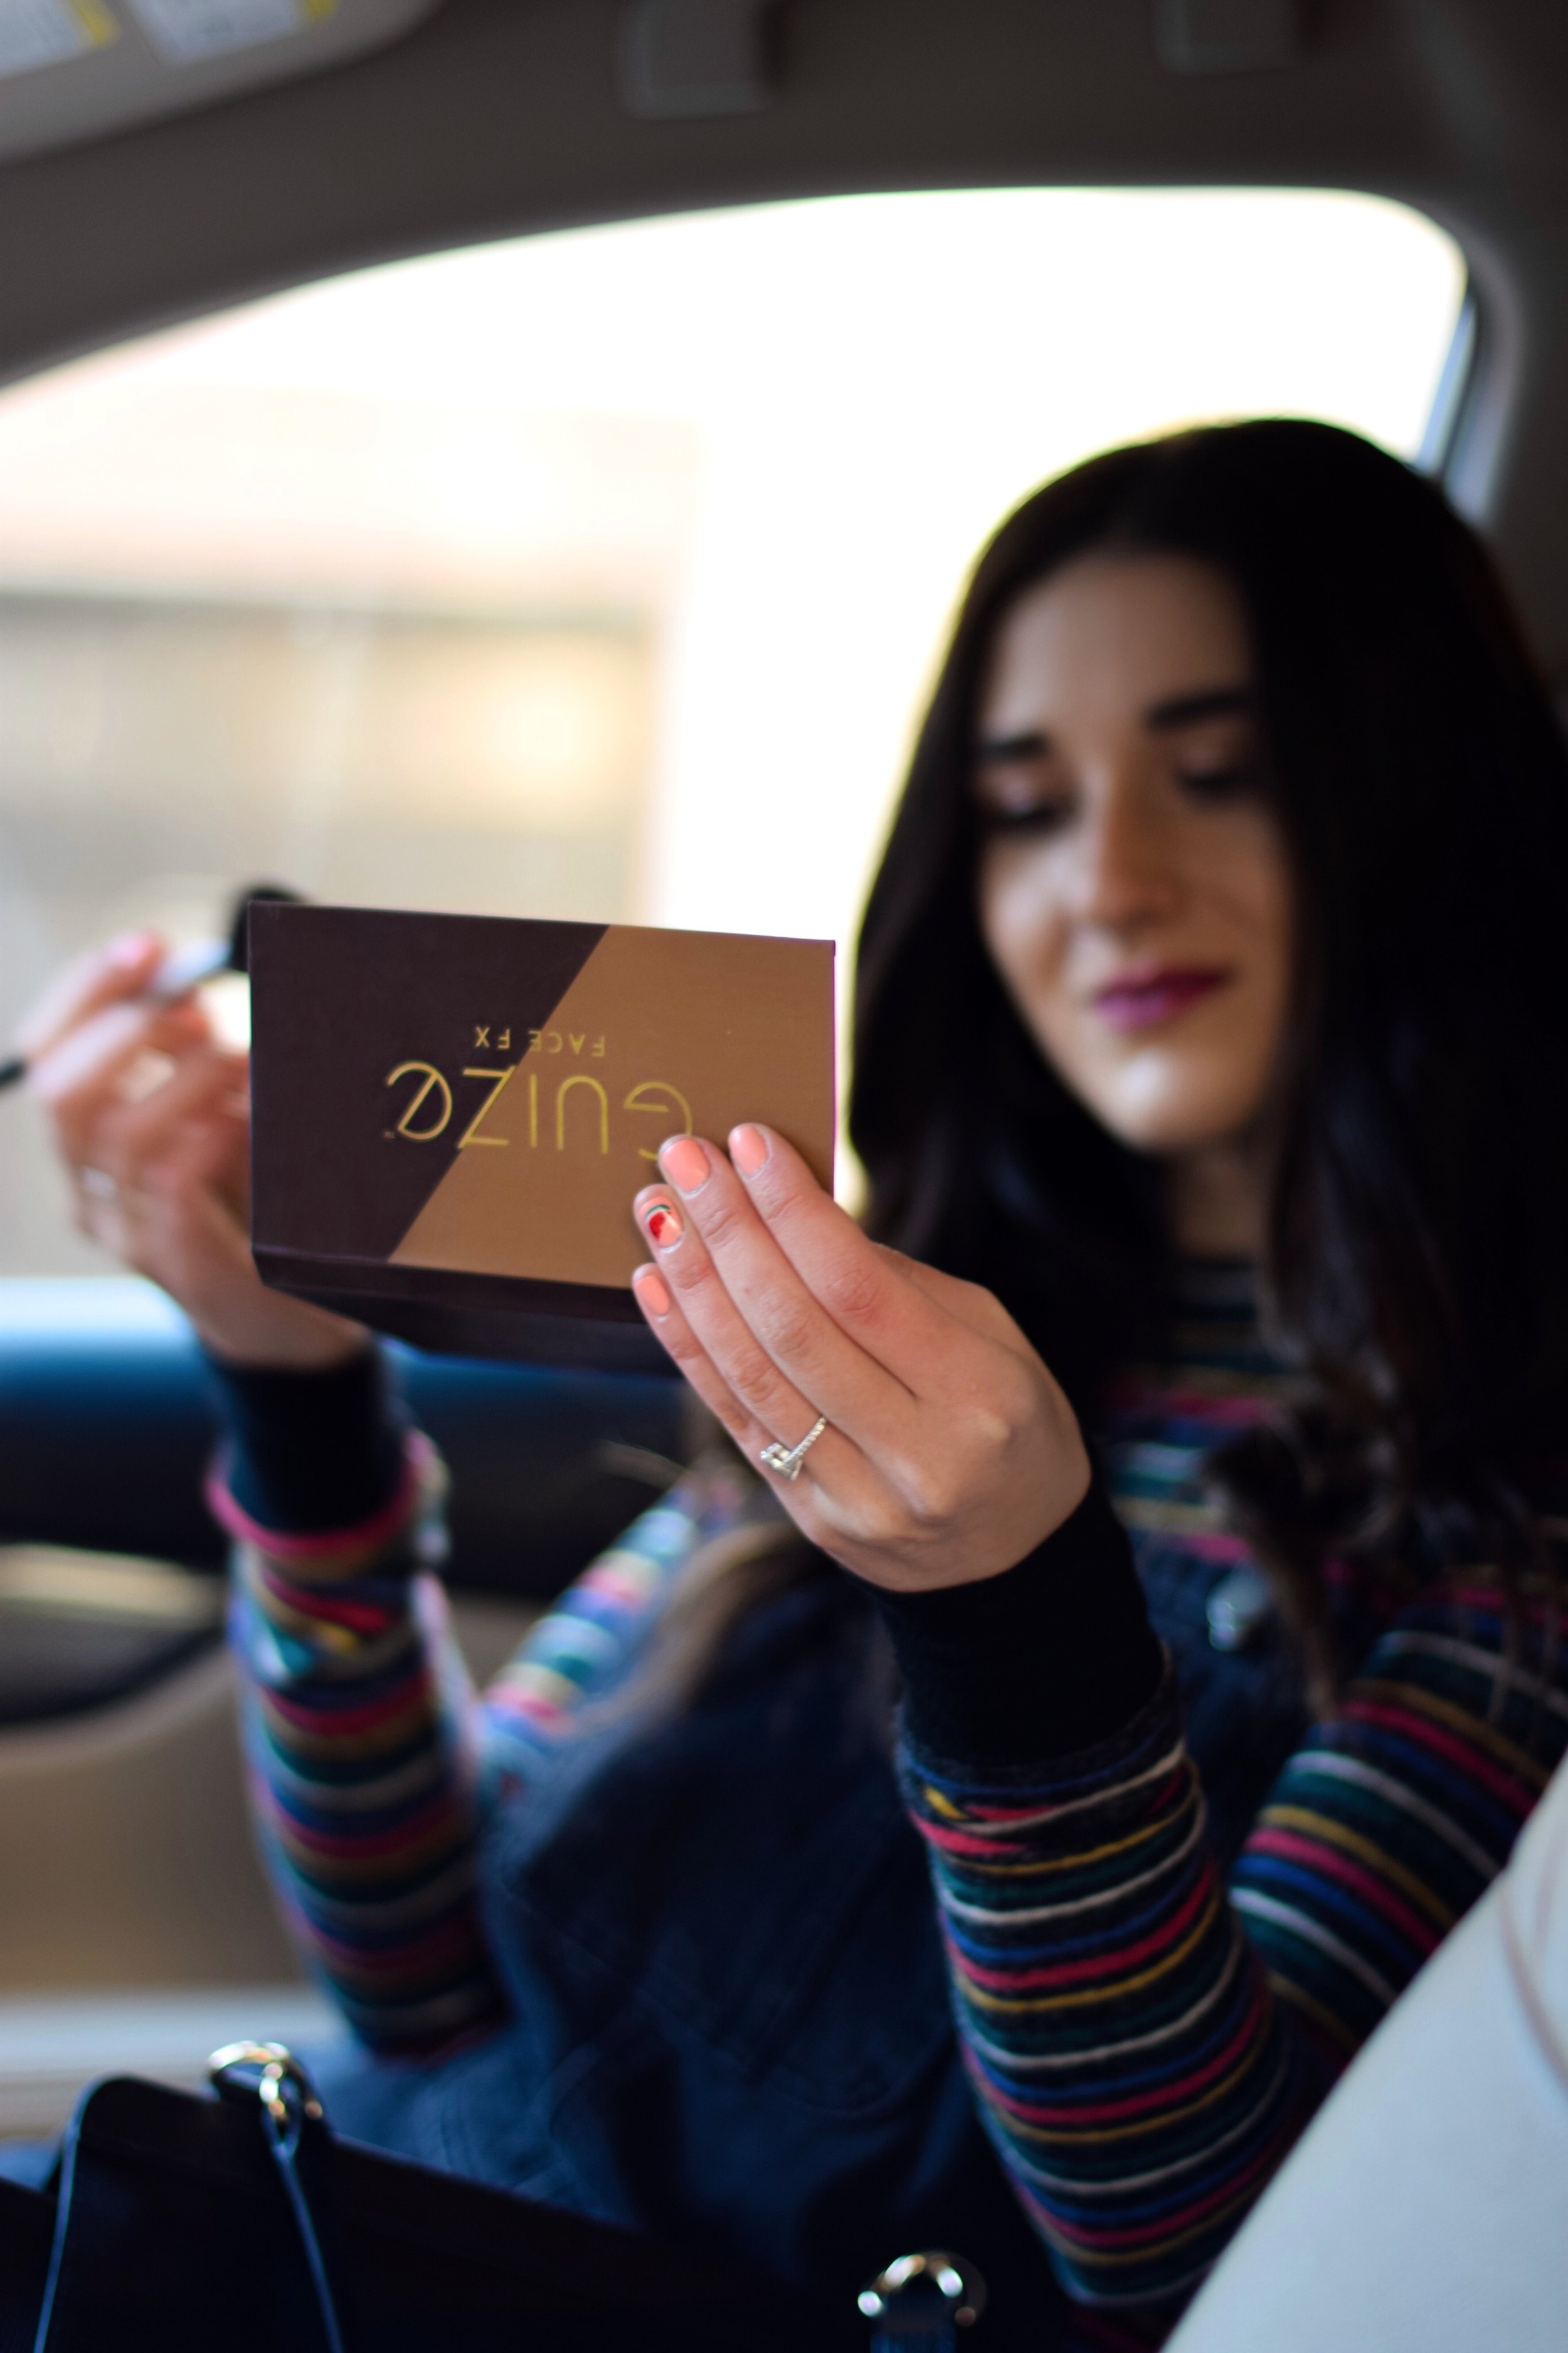 Guize Face FX Contour Palette Review Esther Santer Fashion Blog NYC Street Style Blogger Outfit OOTD Trendy Makeup Beauty Product Bronzer Highlighter Powder Brush Shopping Value $40 Radiant Glow Skin Beautiful Shades New York City Brand Company Collab.jpg